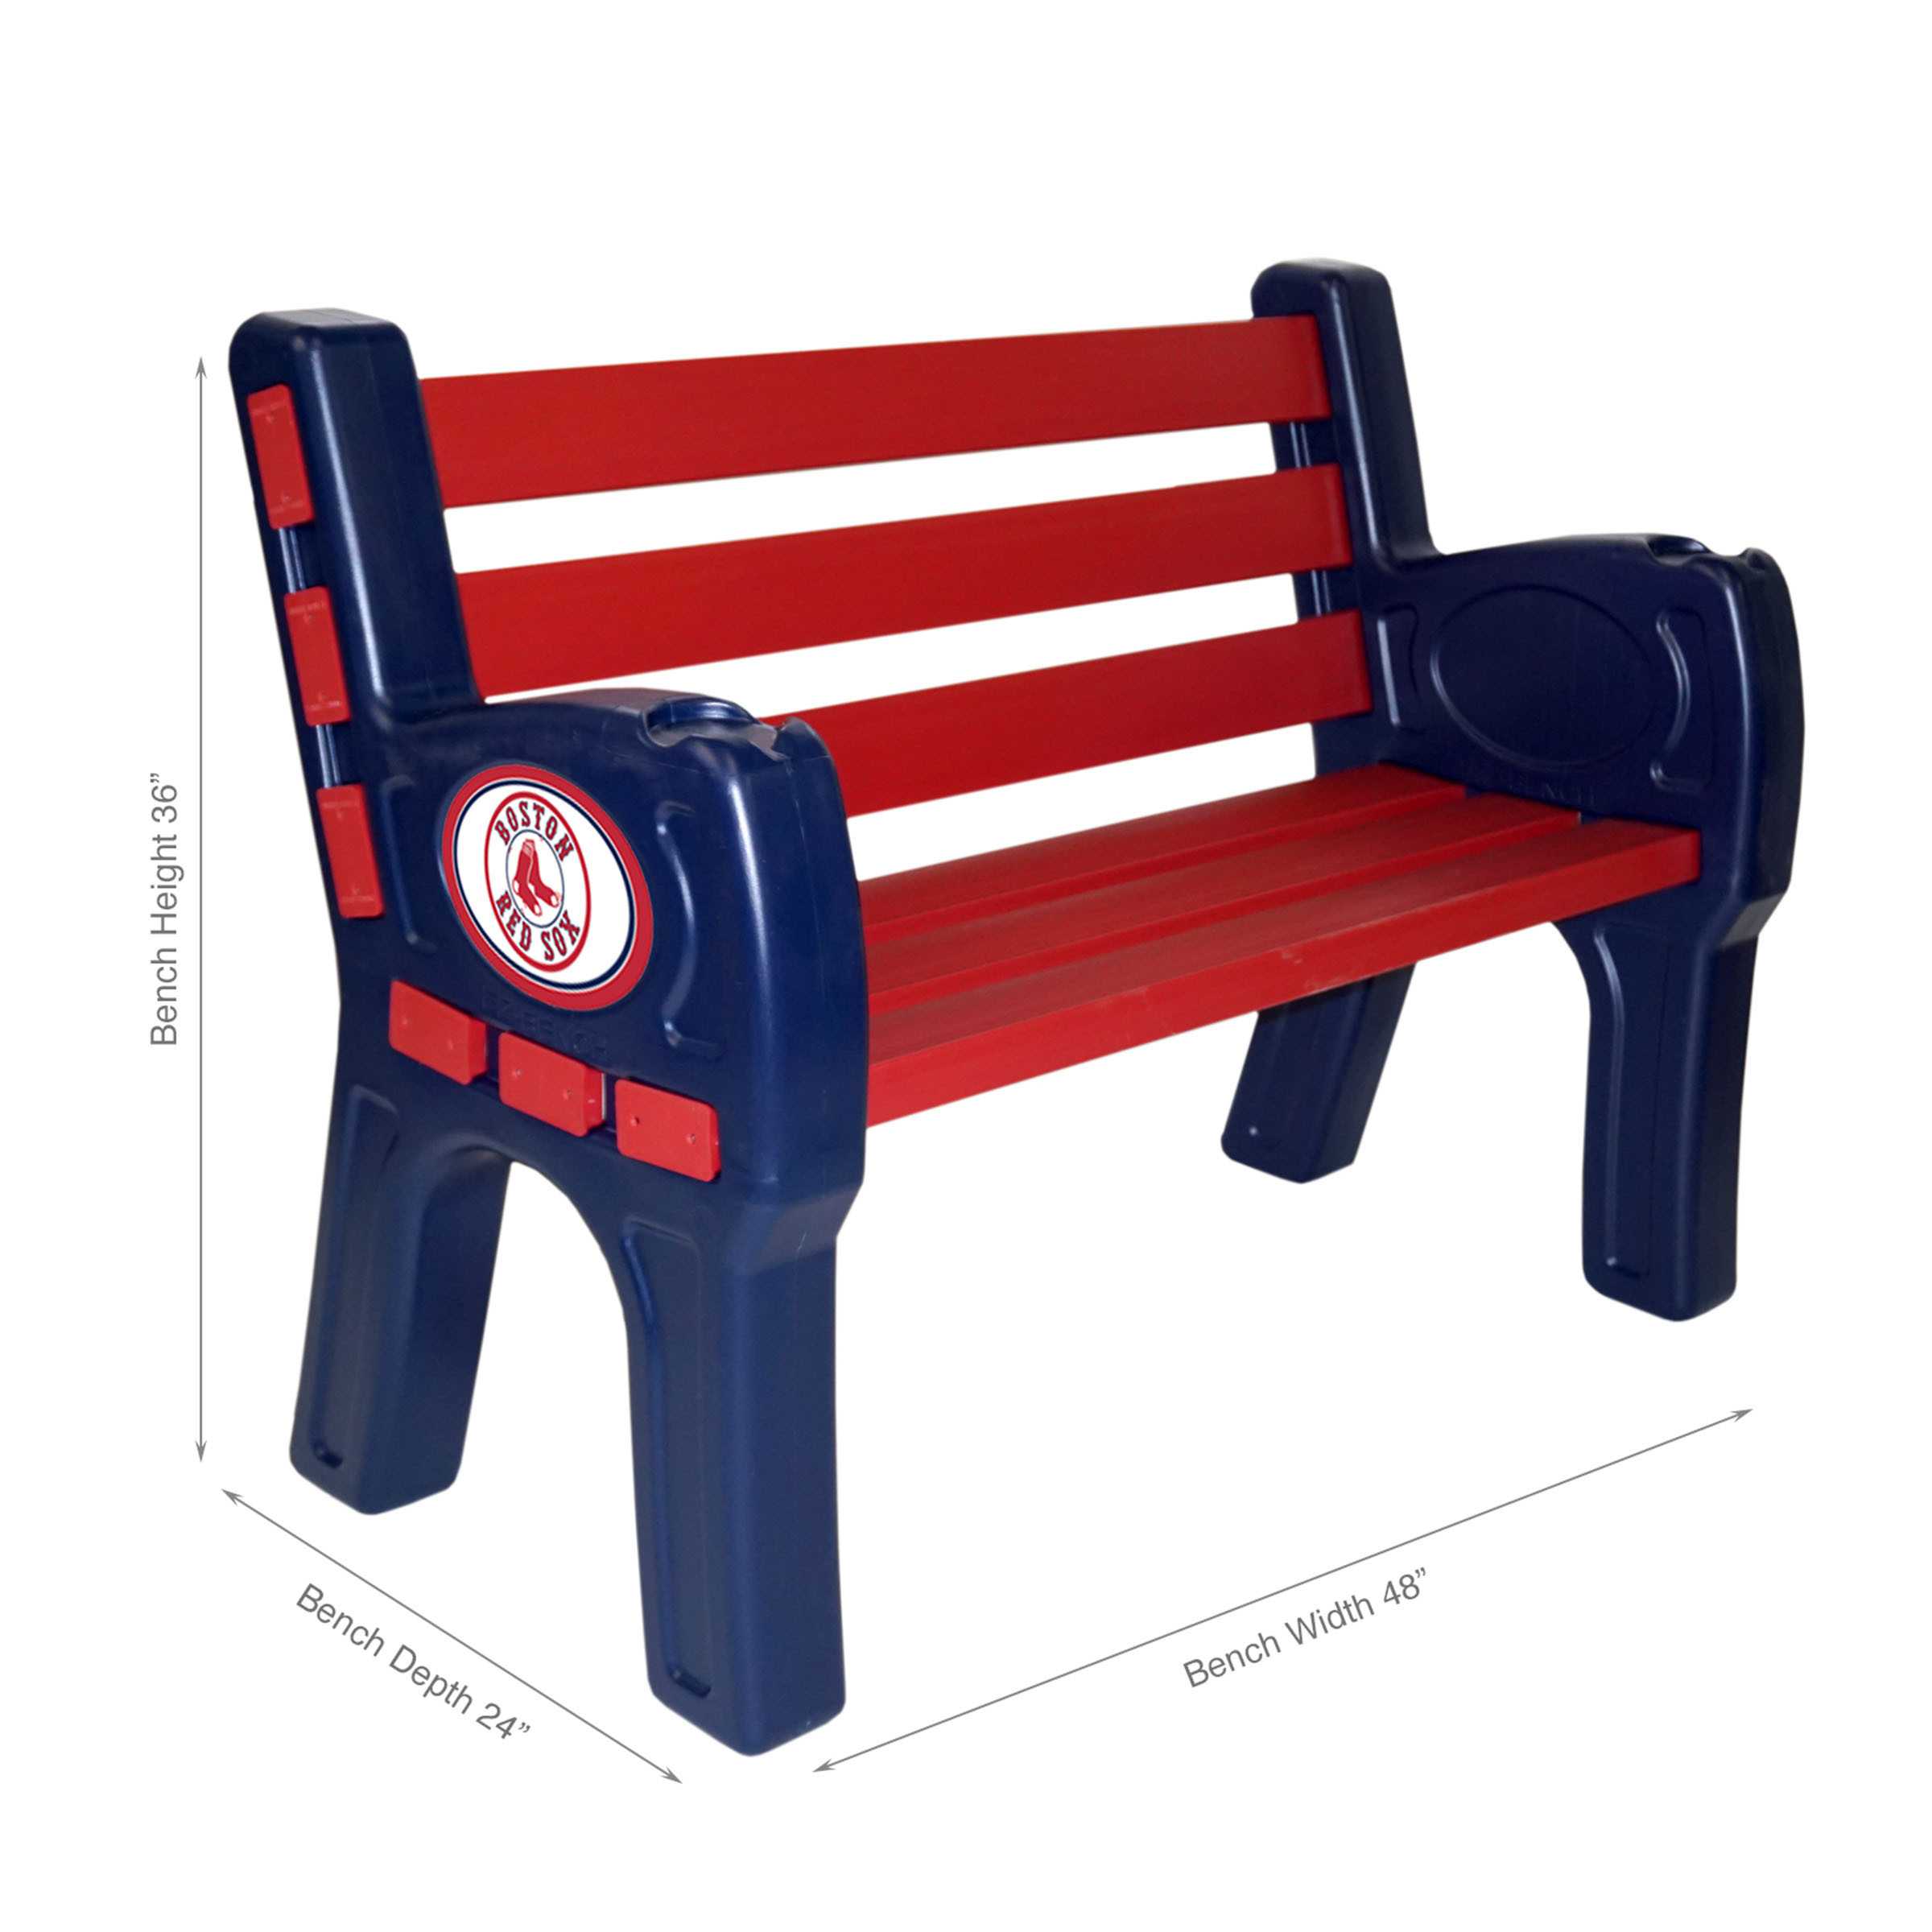 BOSTON RED SOX PARK BENCH